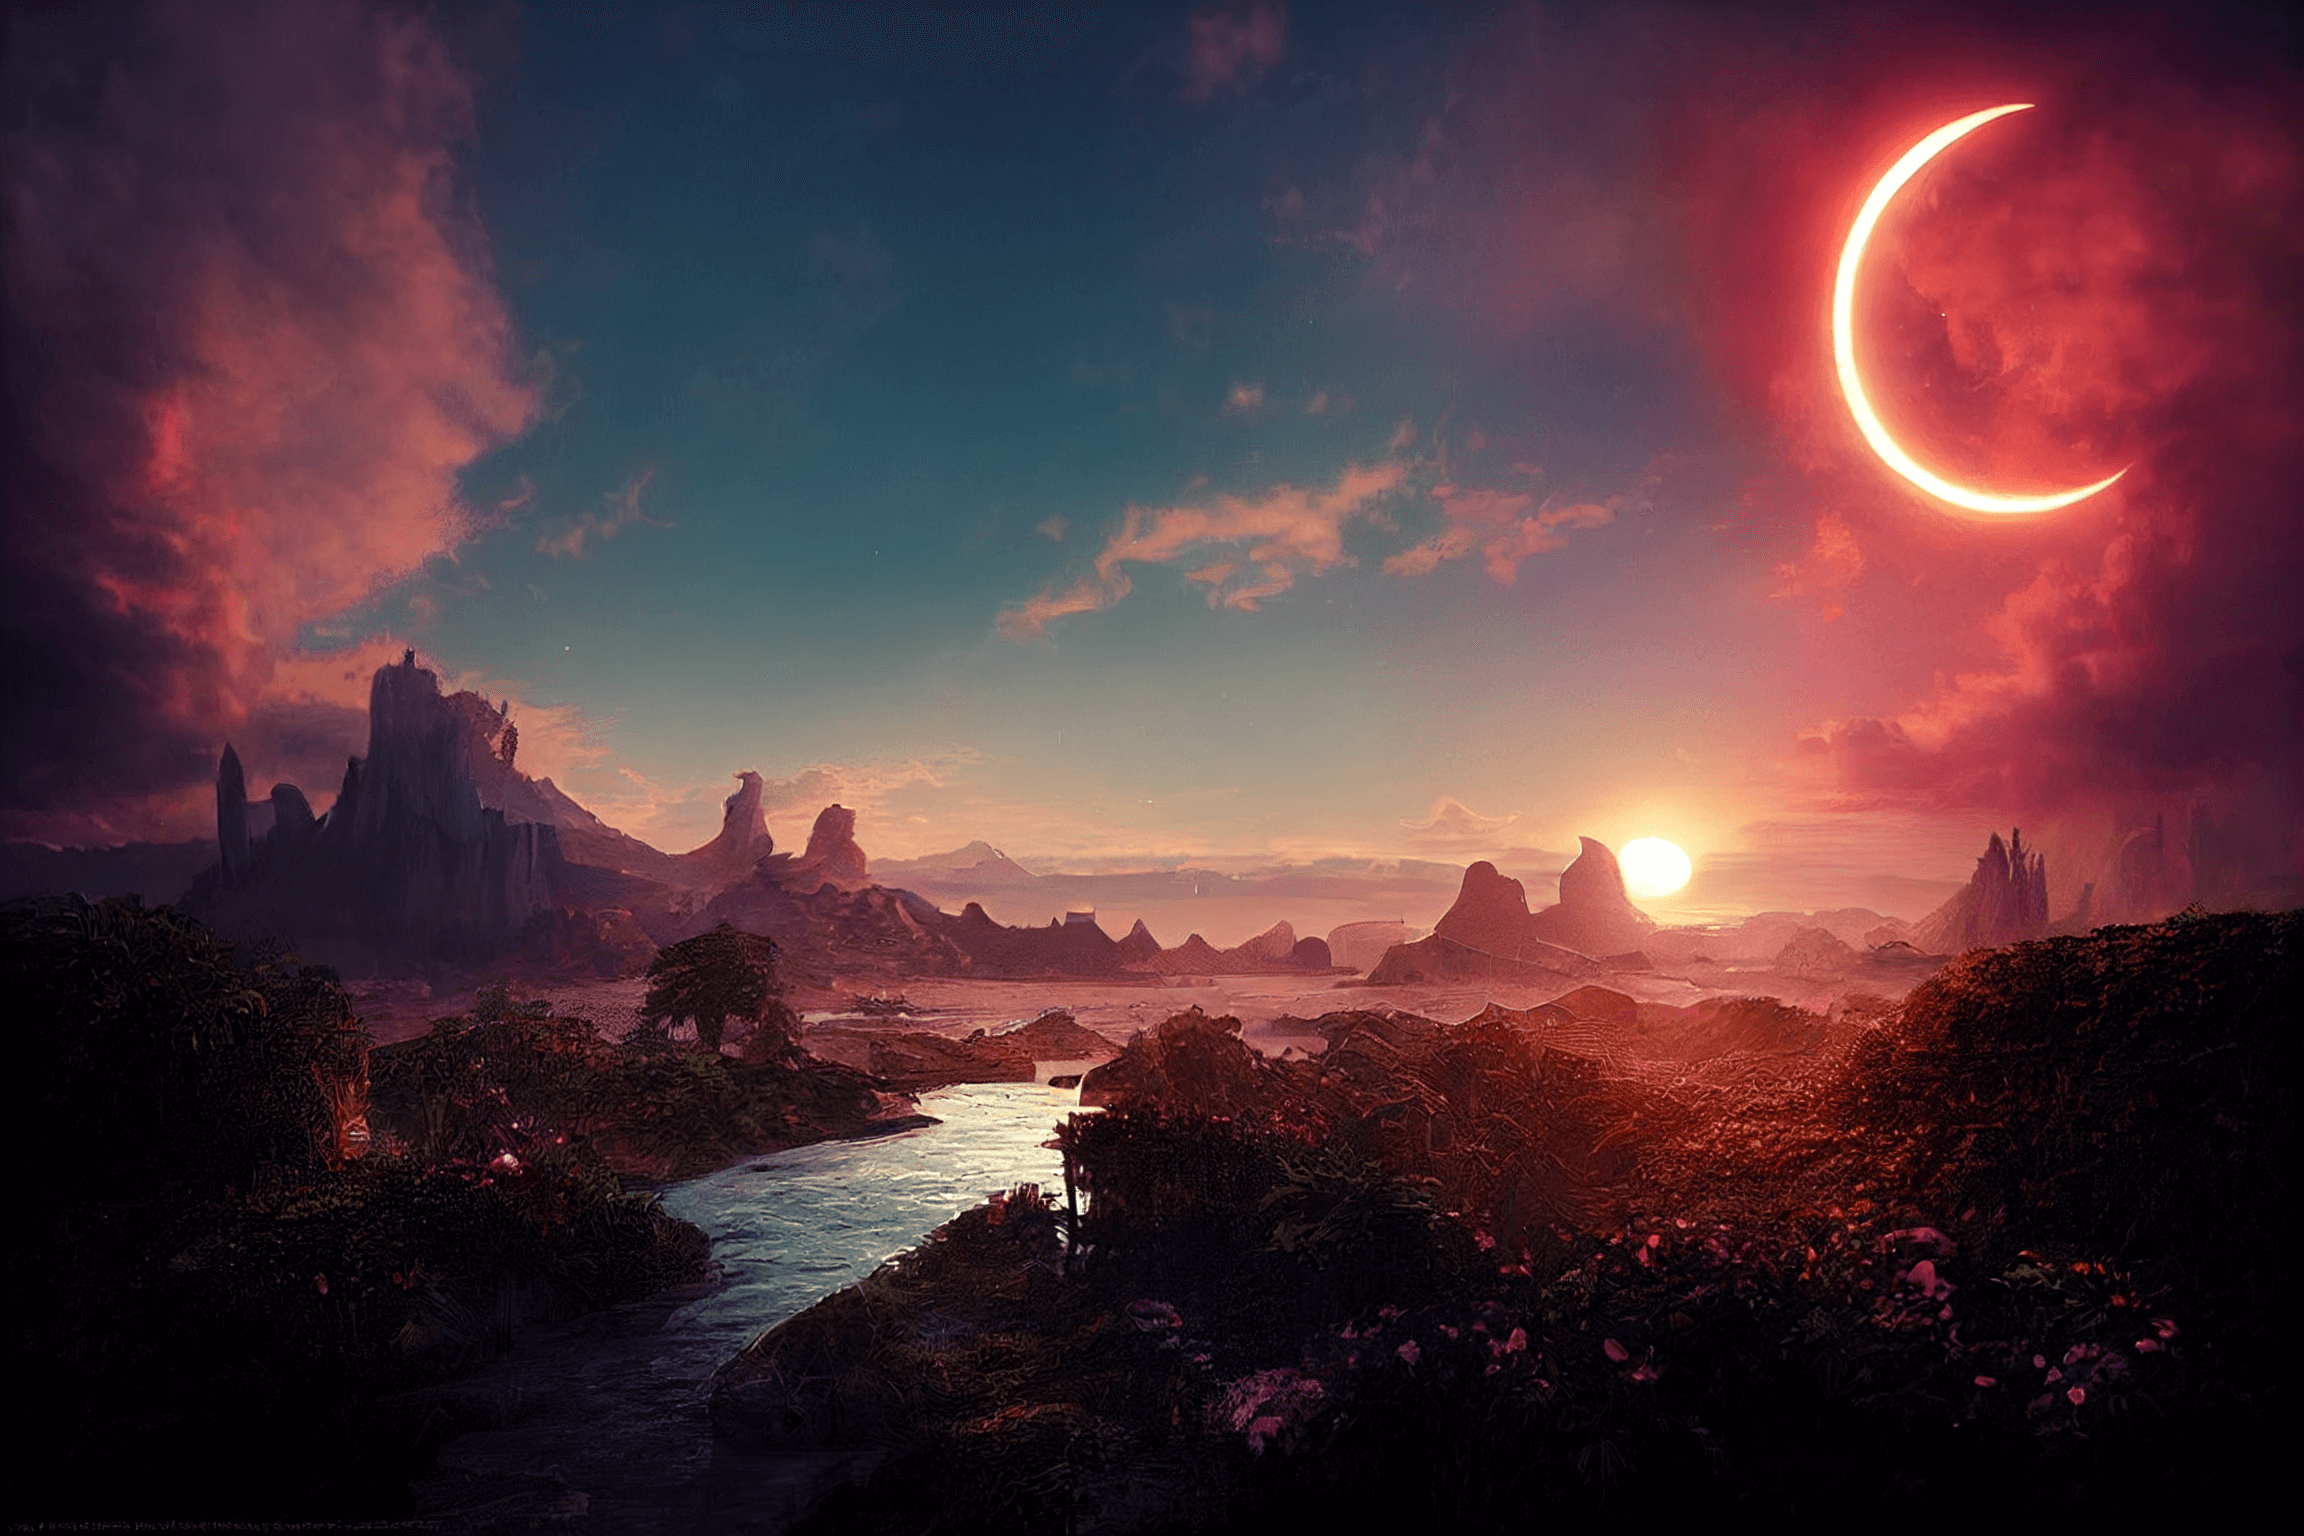 A moon and sun over a landscape on an alien planet, generated by Midjourney